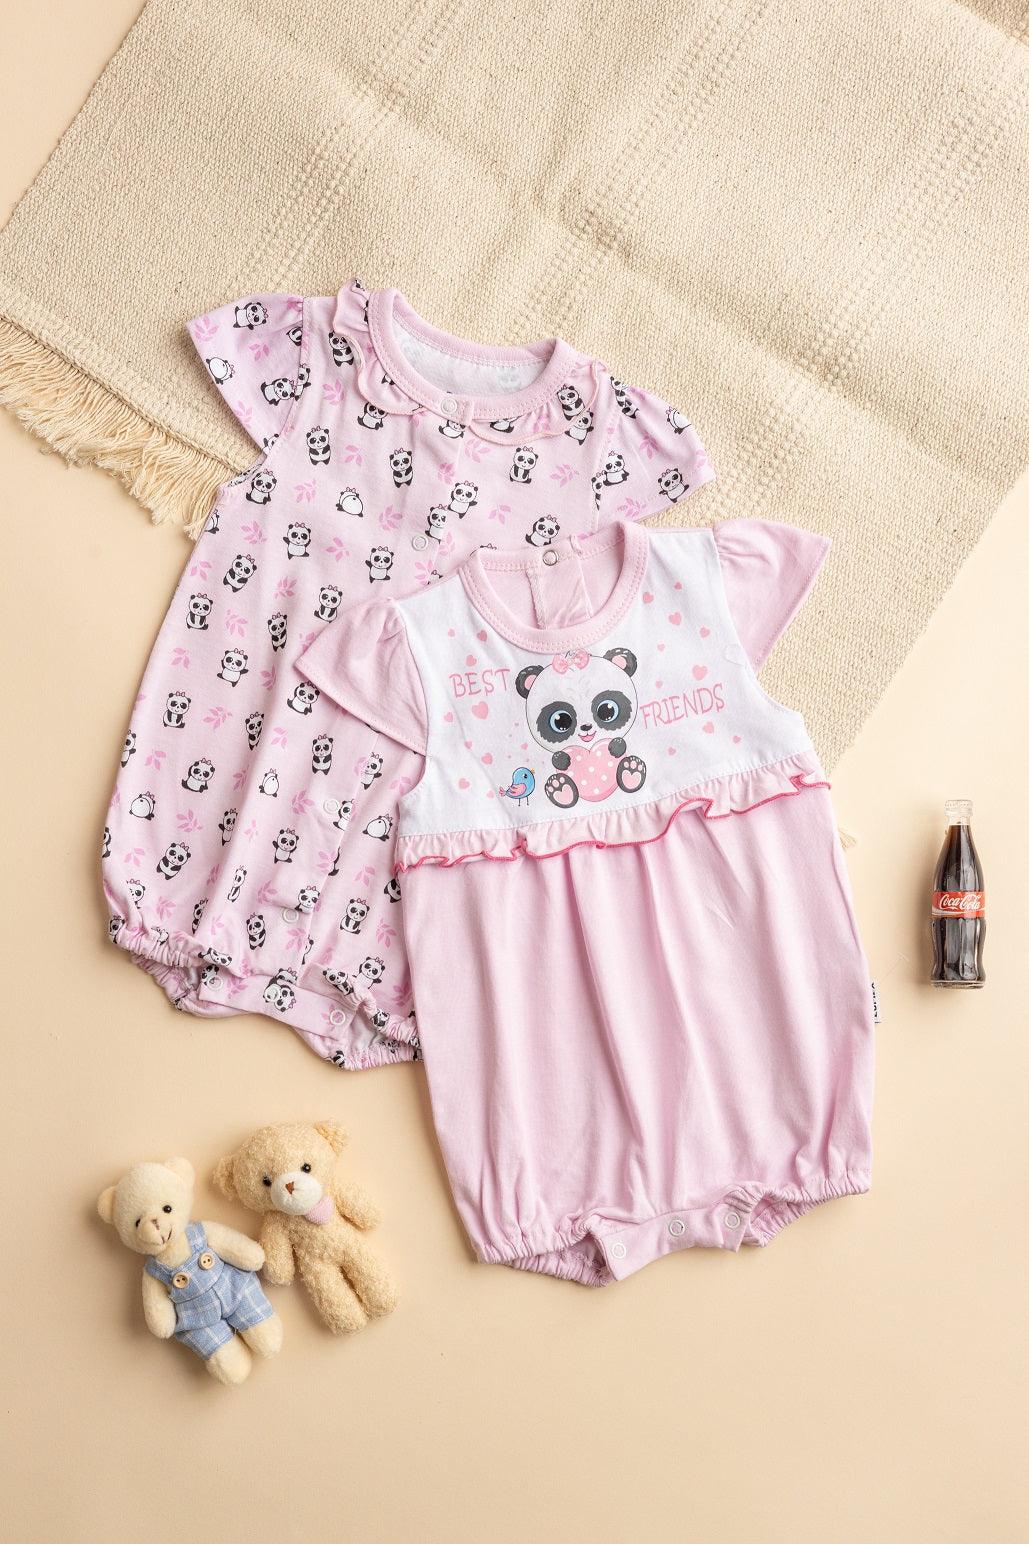 Panda-monium! This Adorable Romper Is Sure to Be a Hit.